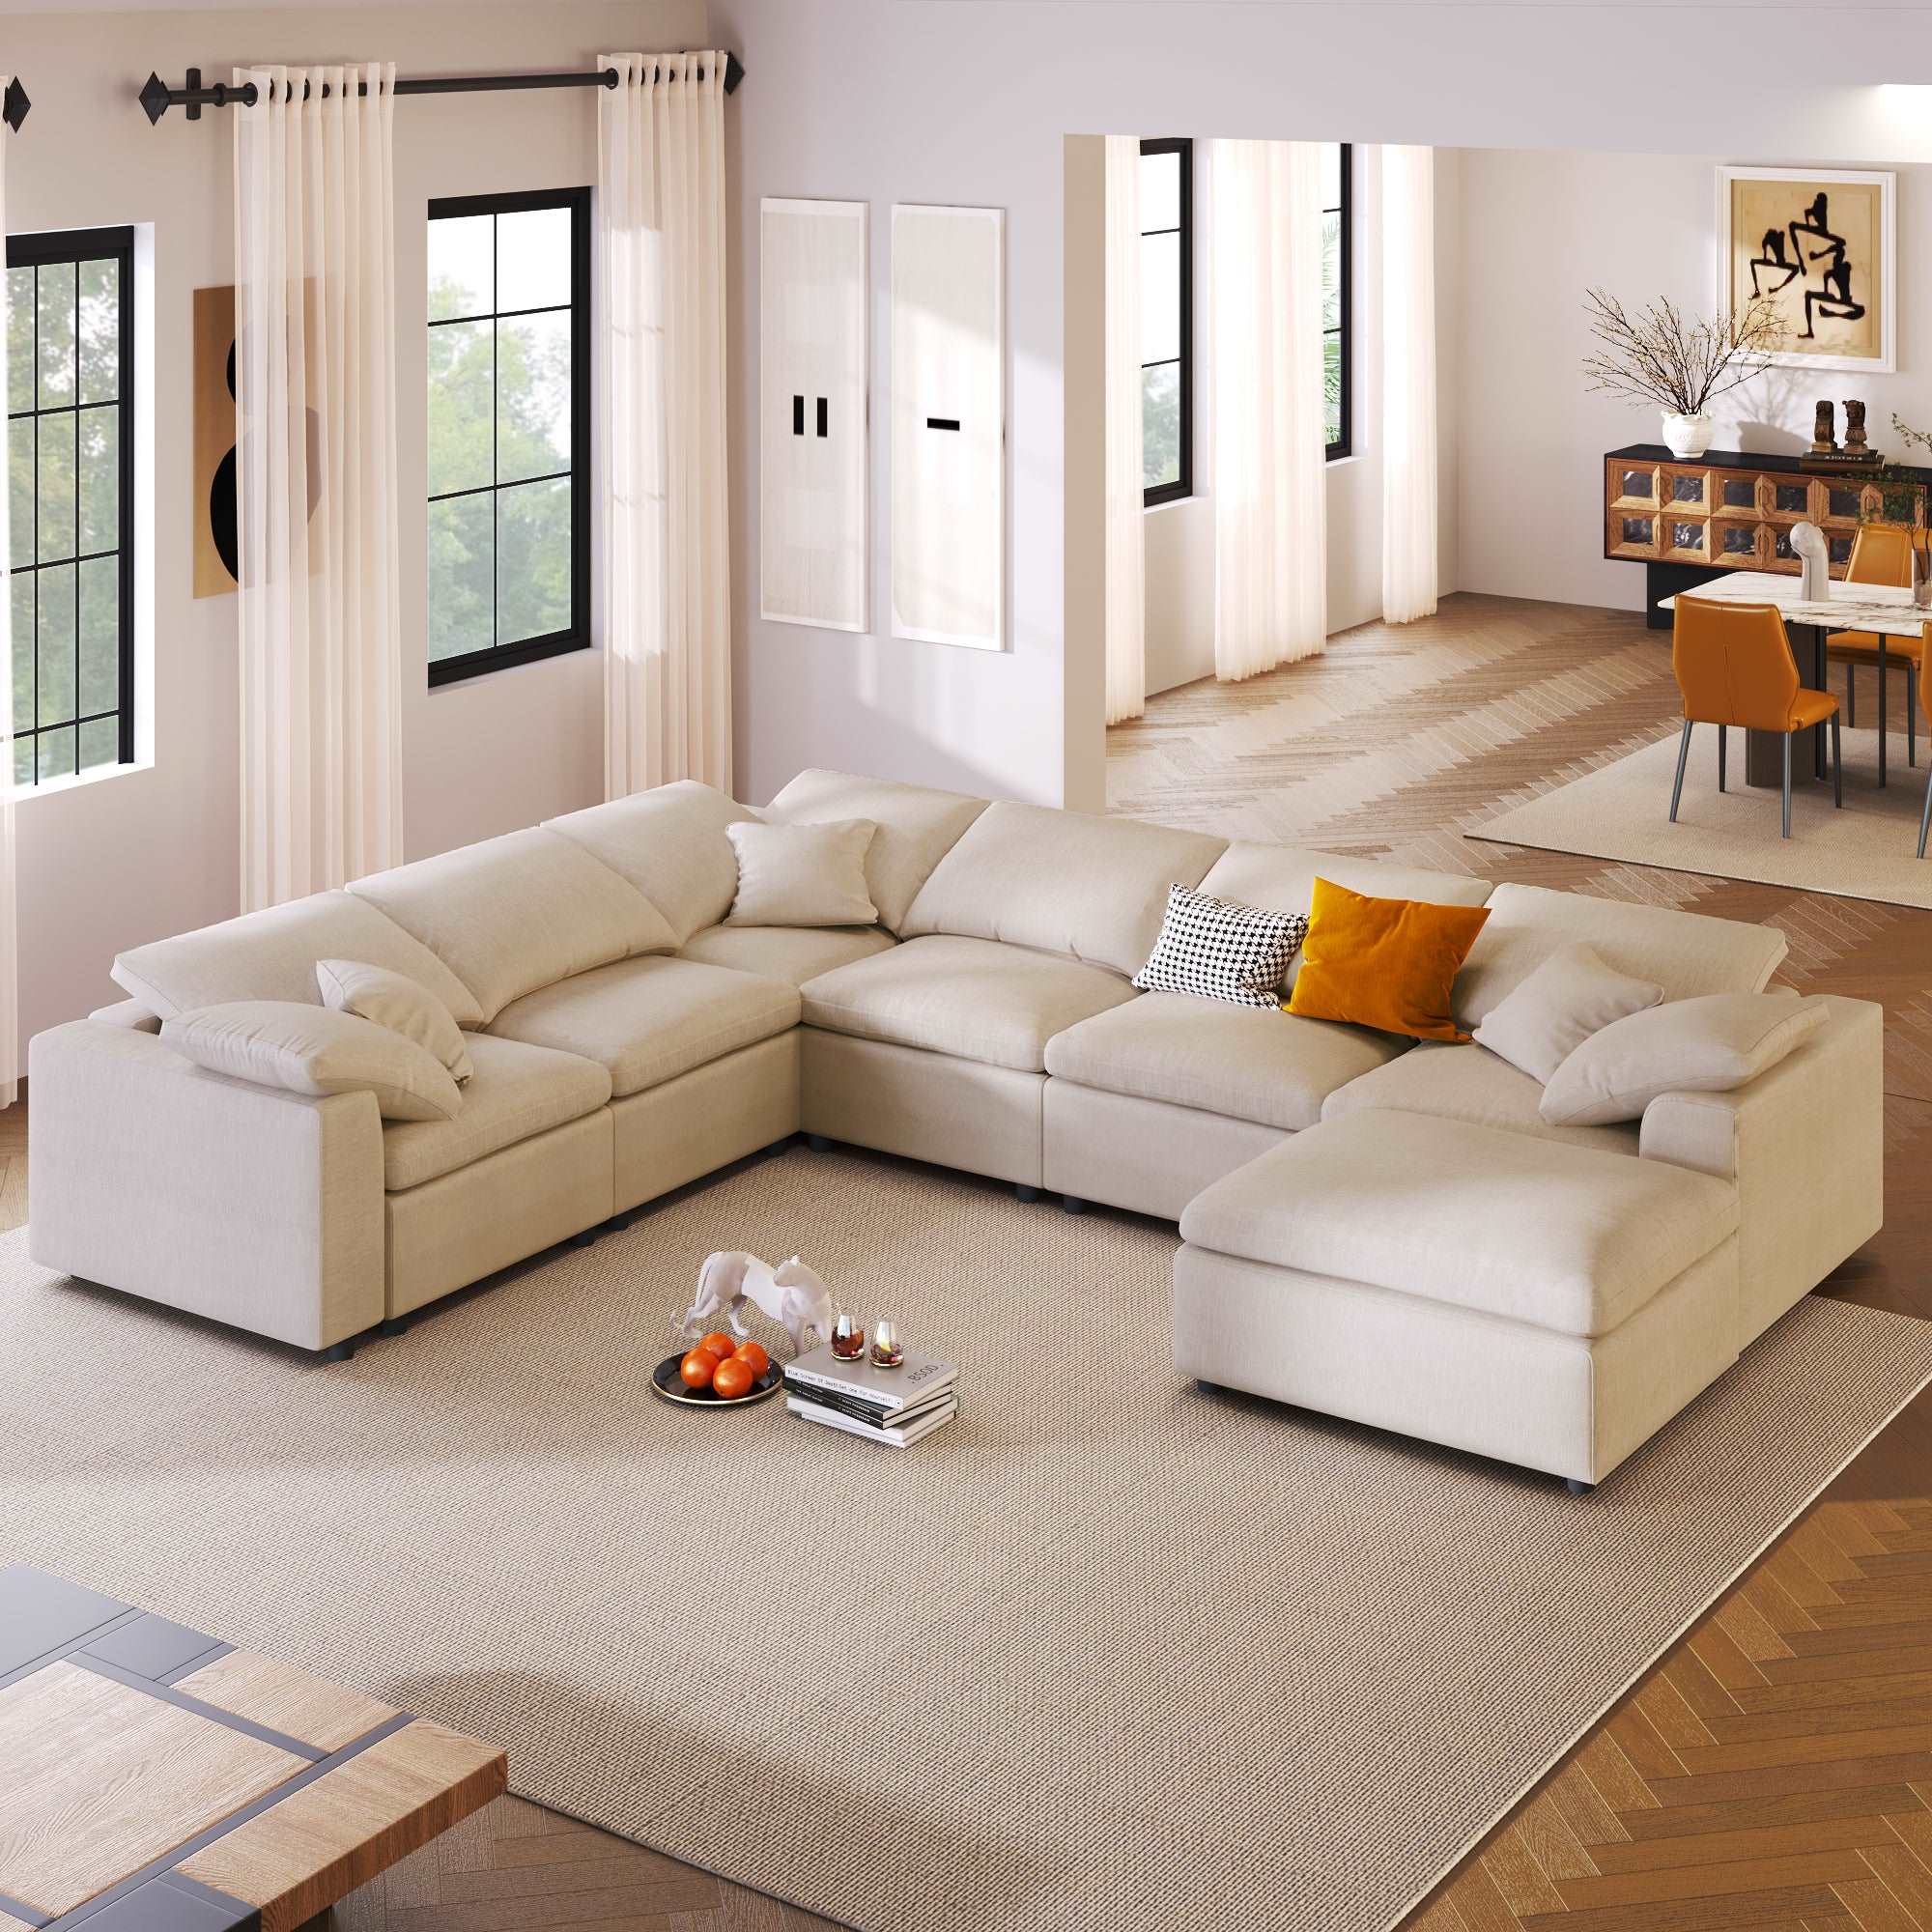 Bellemave 129.3" Oversized Modular Sectional Sofa with Ottoman L Shaped Corner Sectional